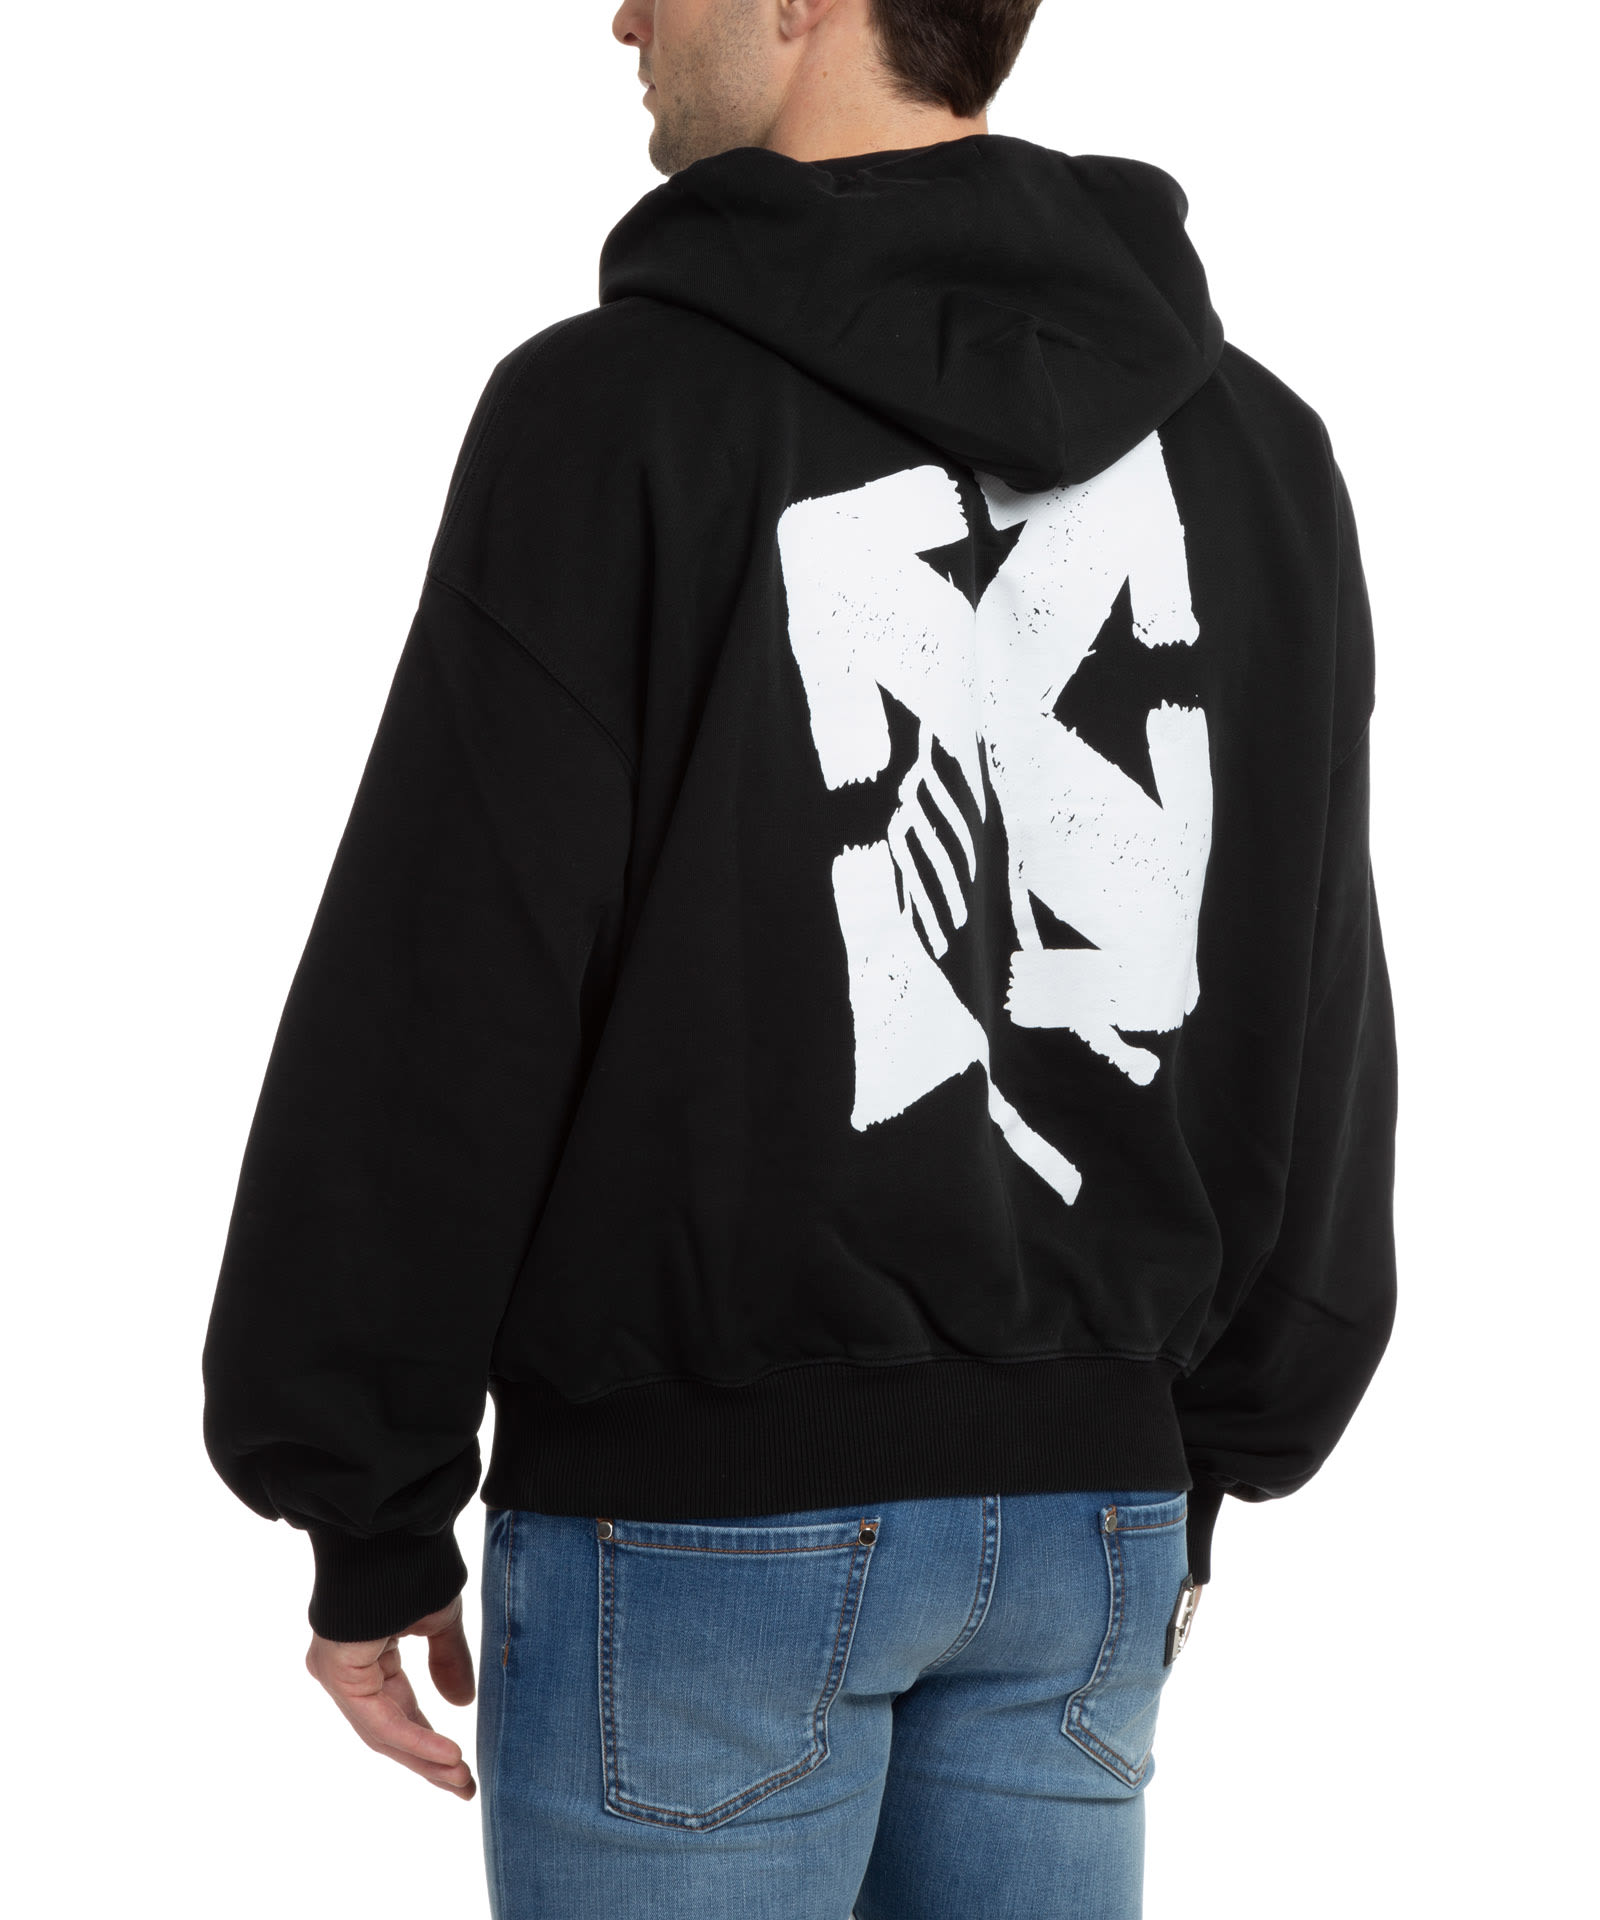 Off-White Cotton Hoodie